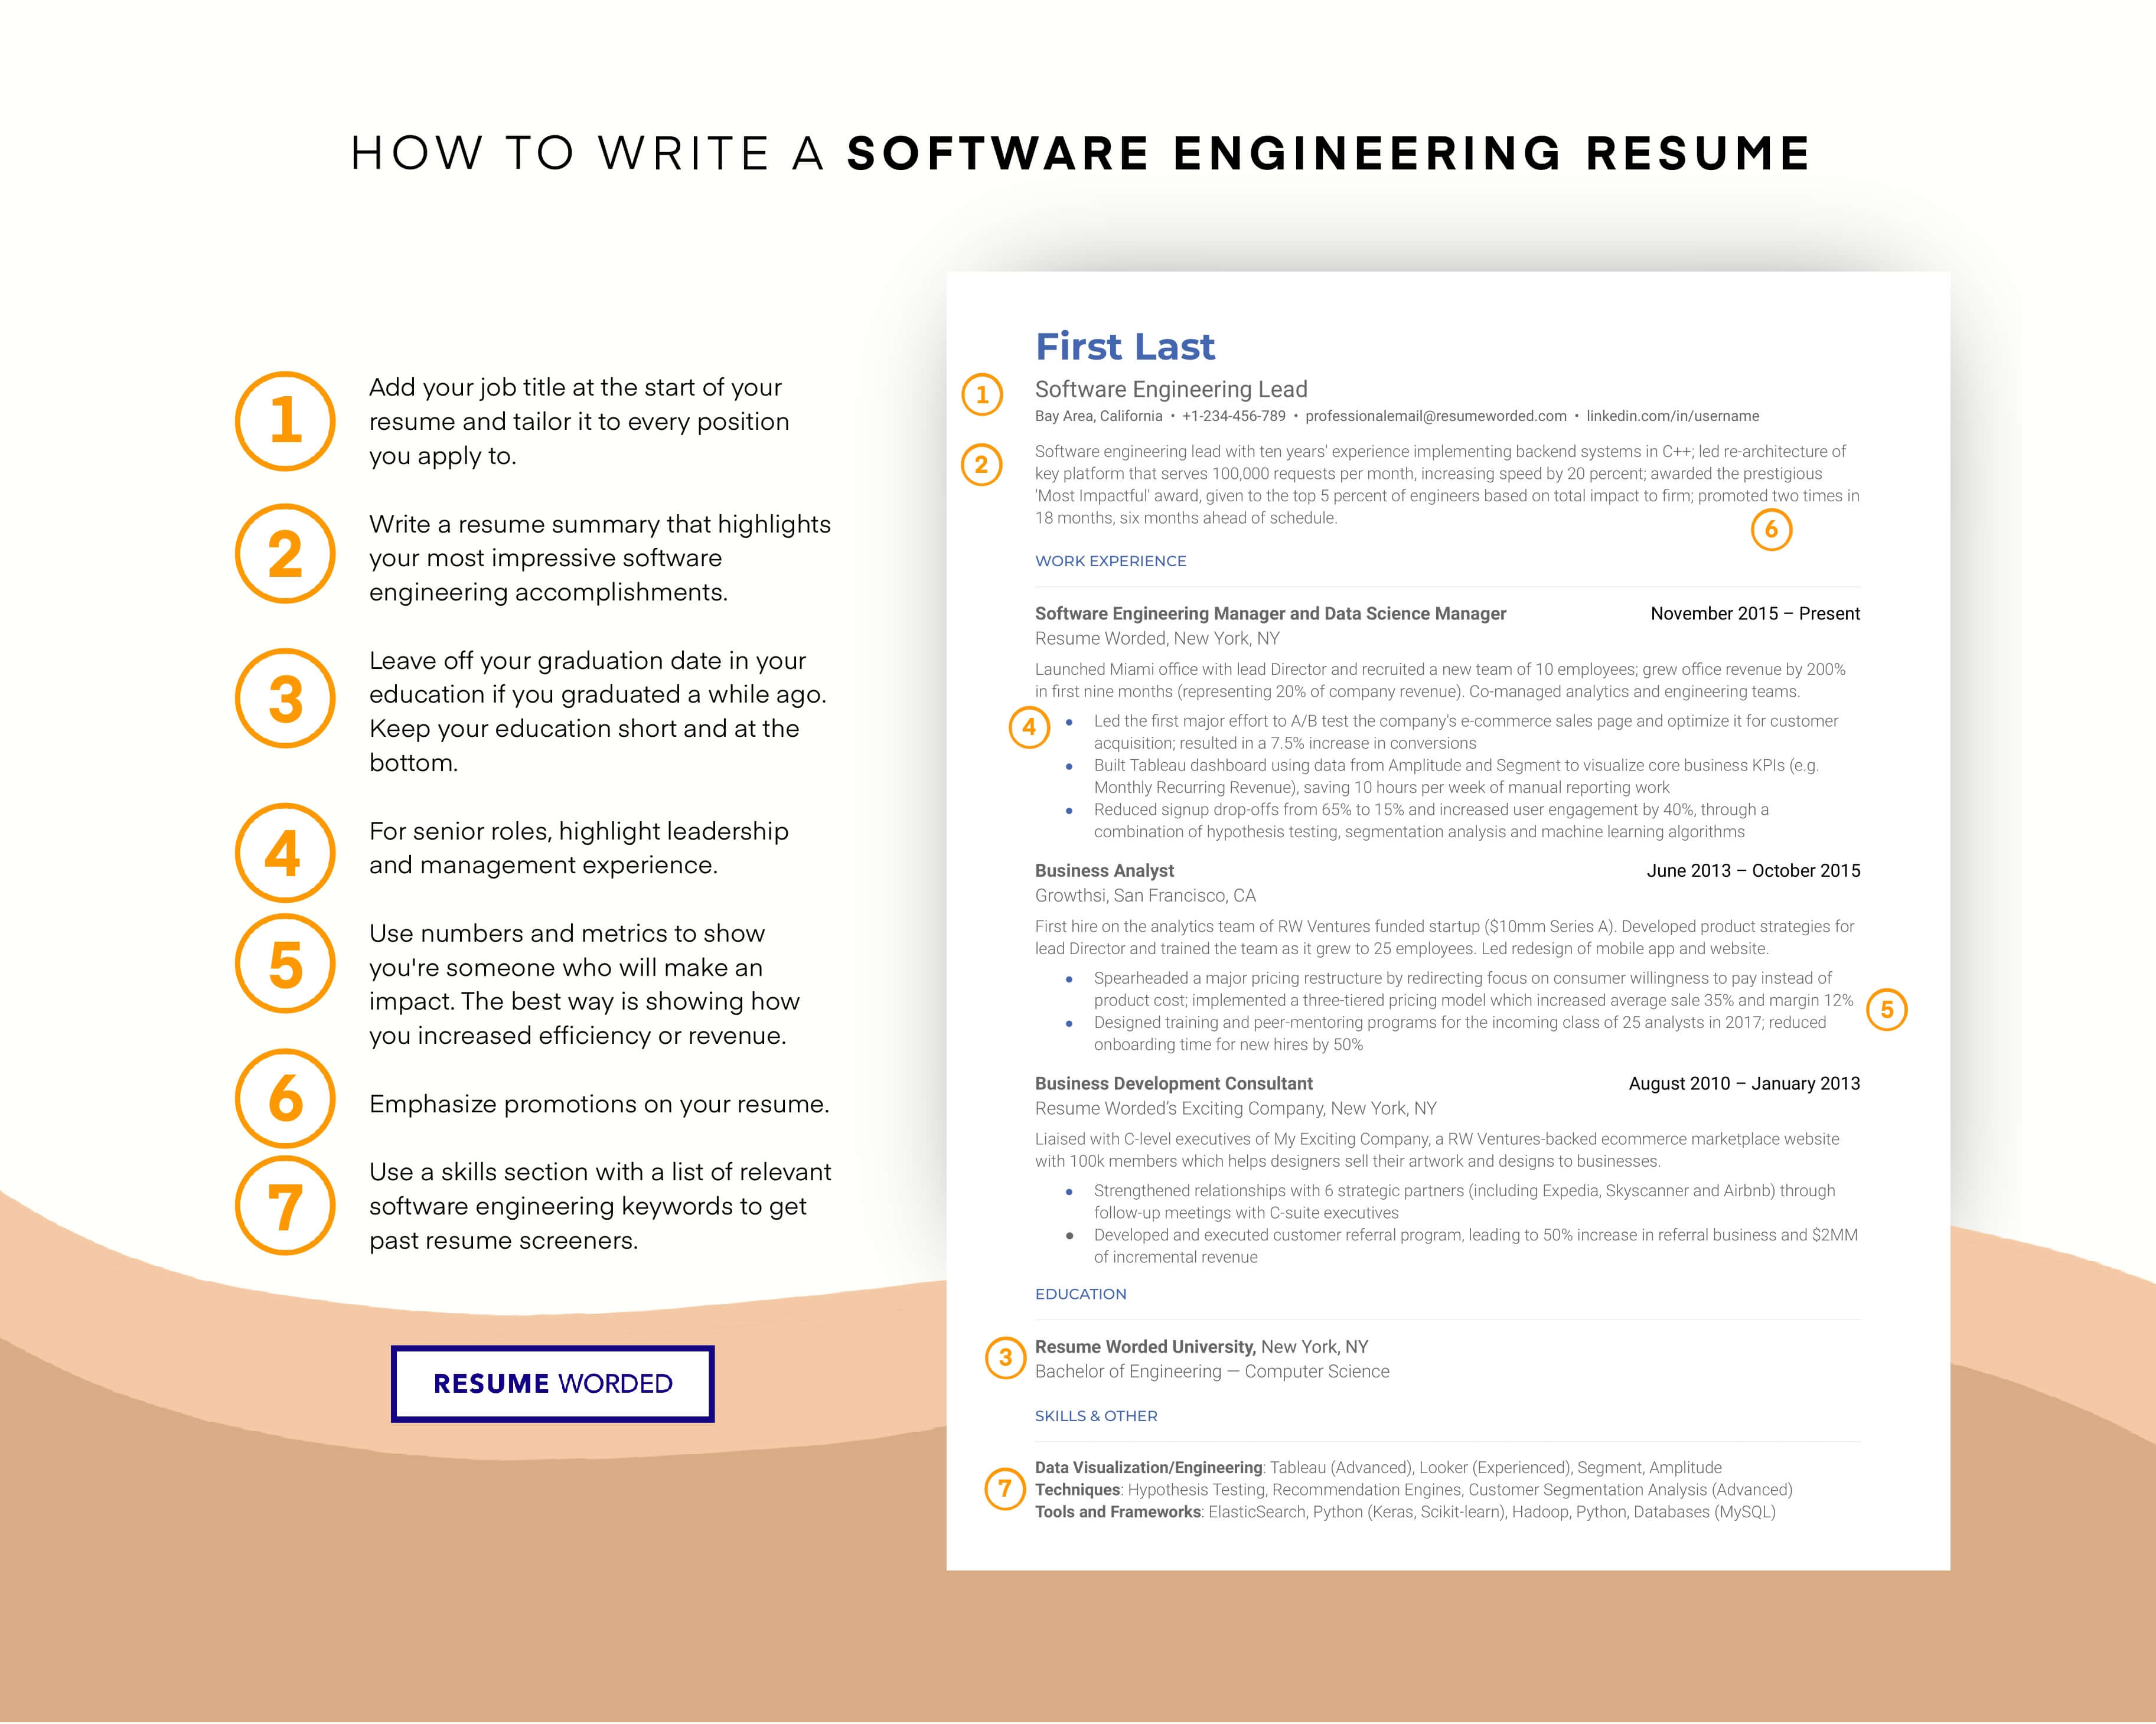 Highlight your experience with software solutions. - Implementation Manager Resume